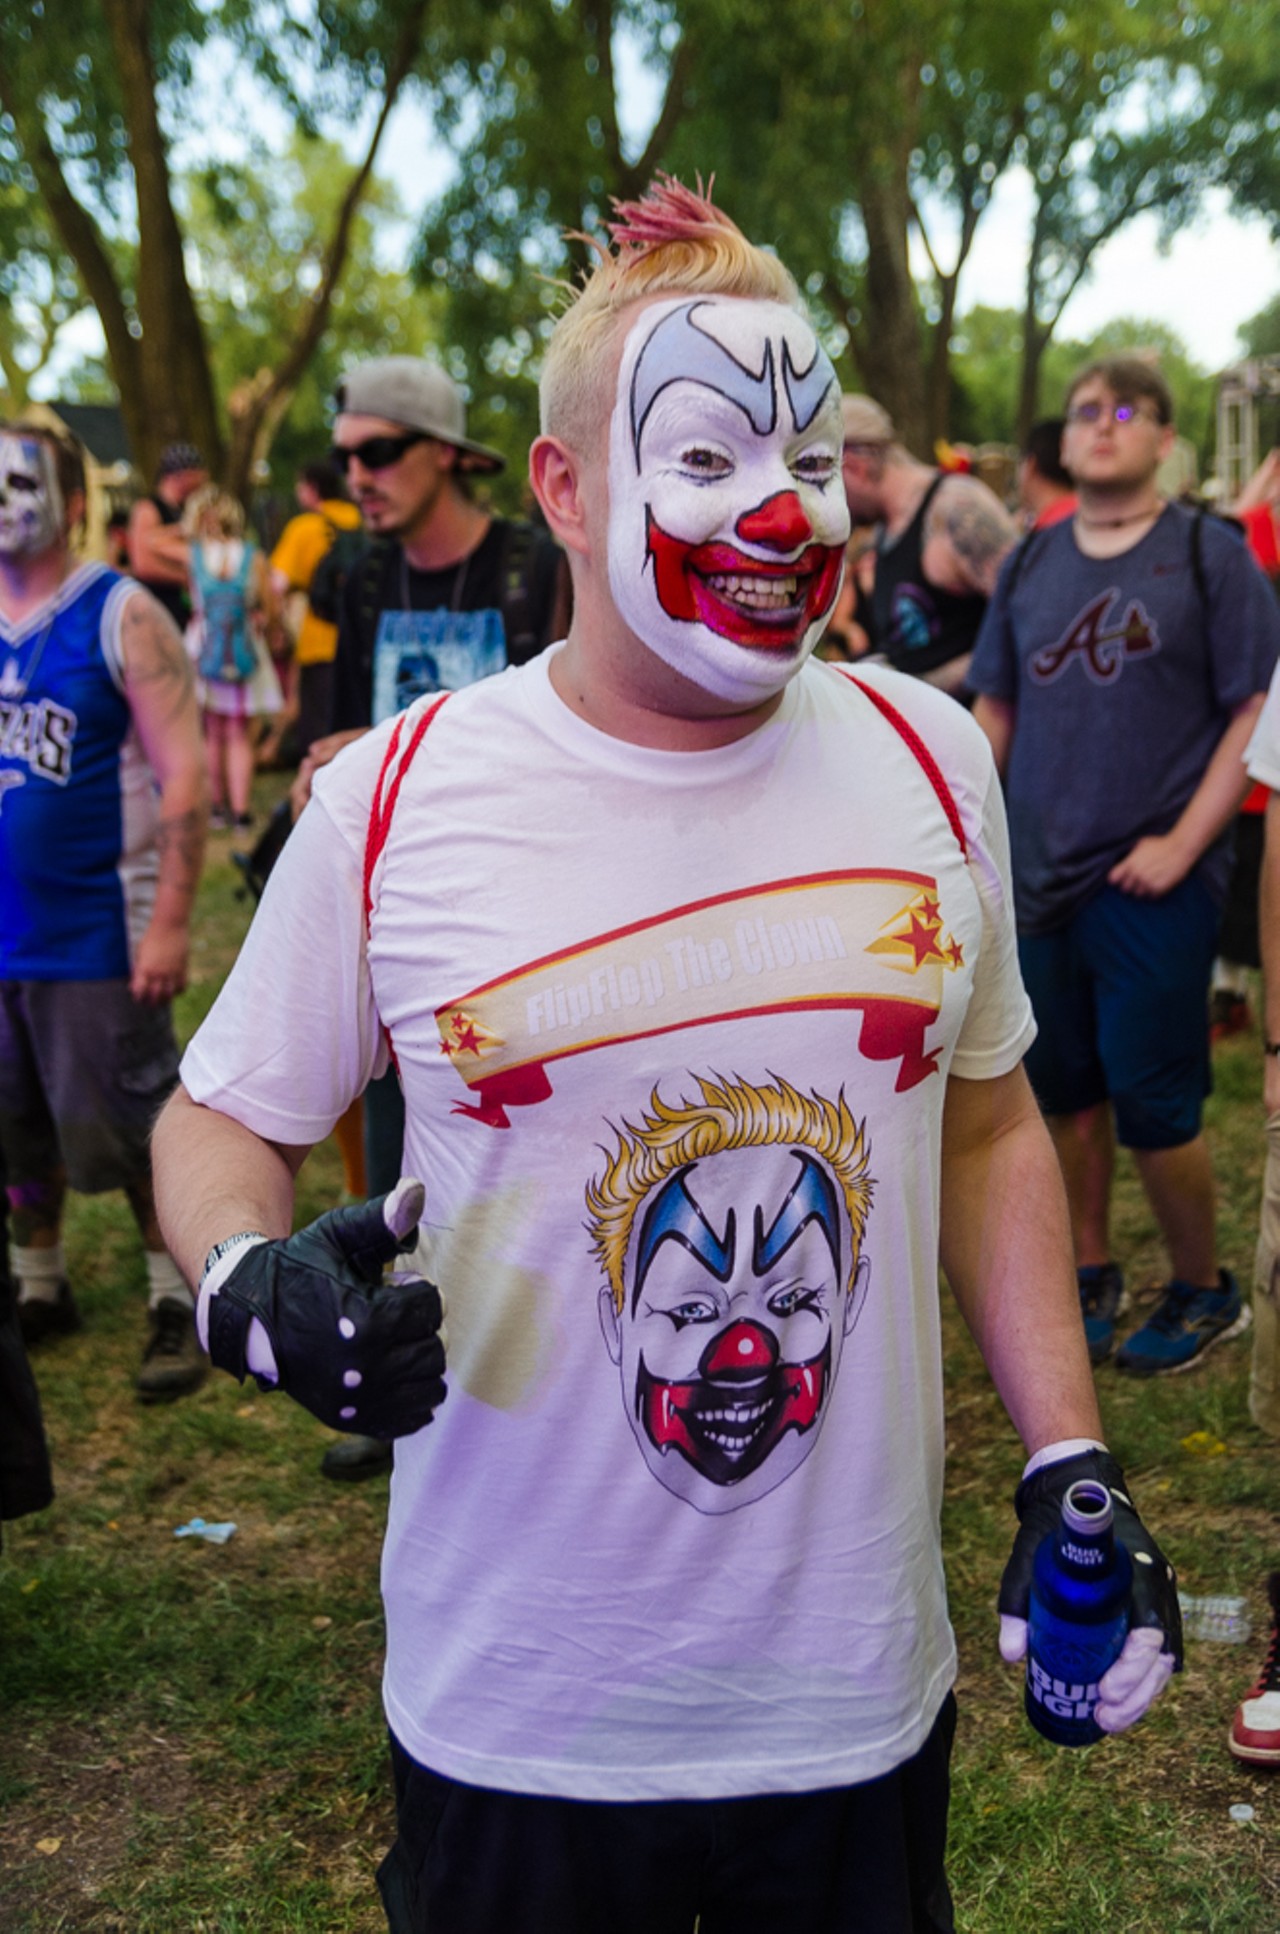 Everything we saw at the 2017 Gathering of the Juggalos